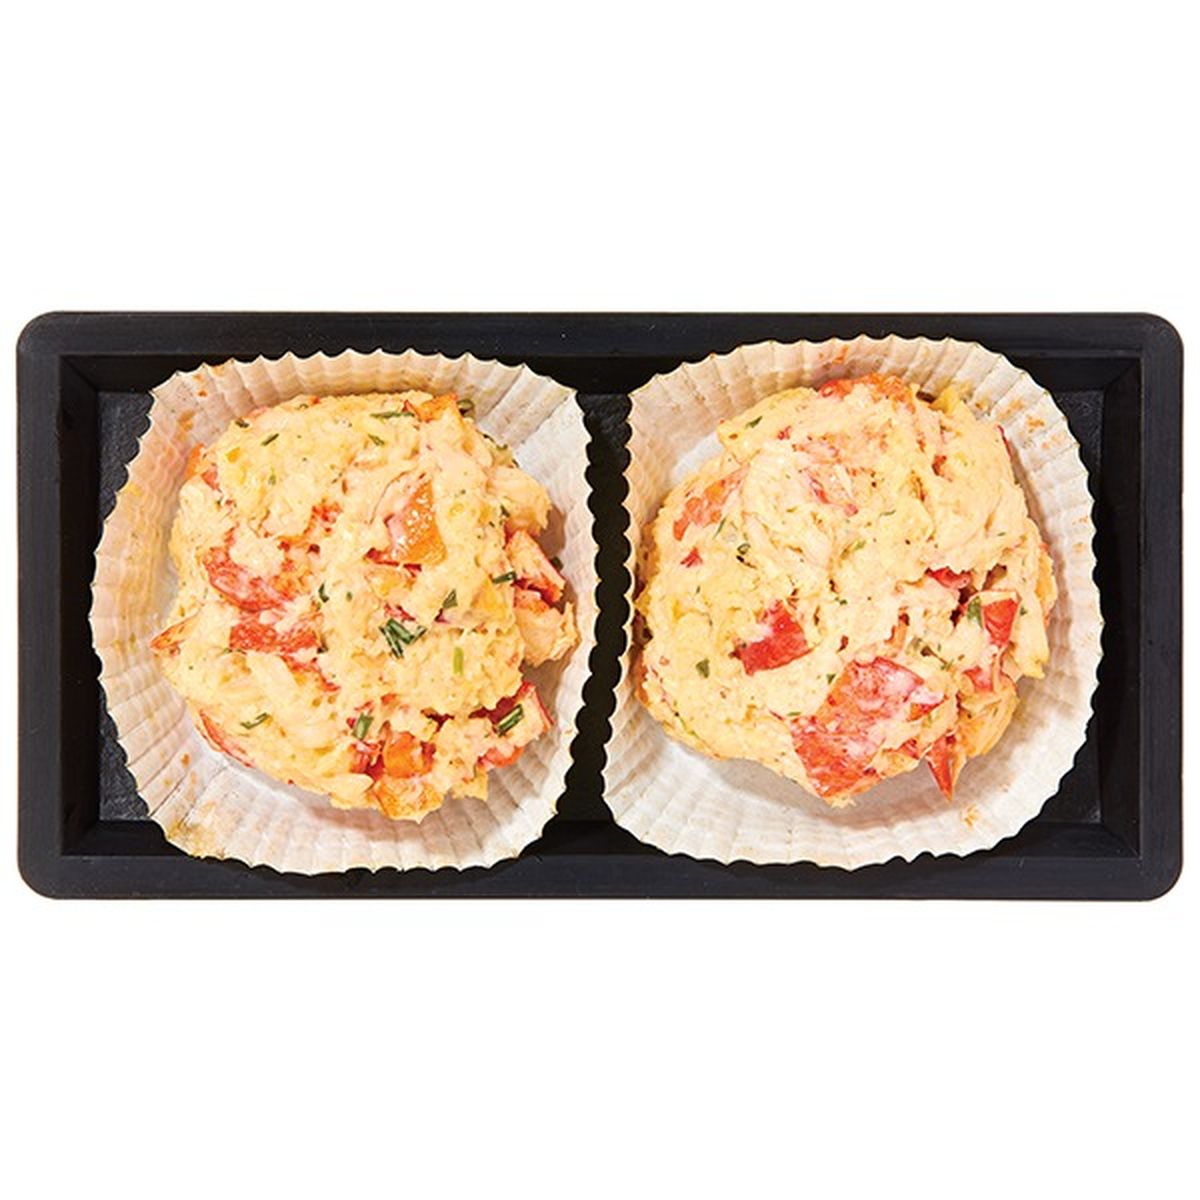 Calories in Wegmans Ready to Cook Lobster Cake, 2 Pack